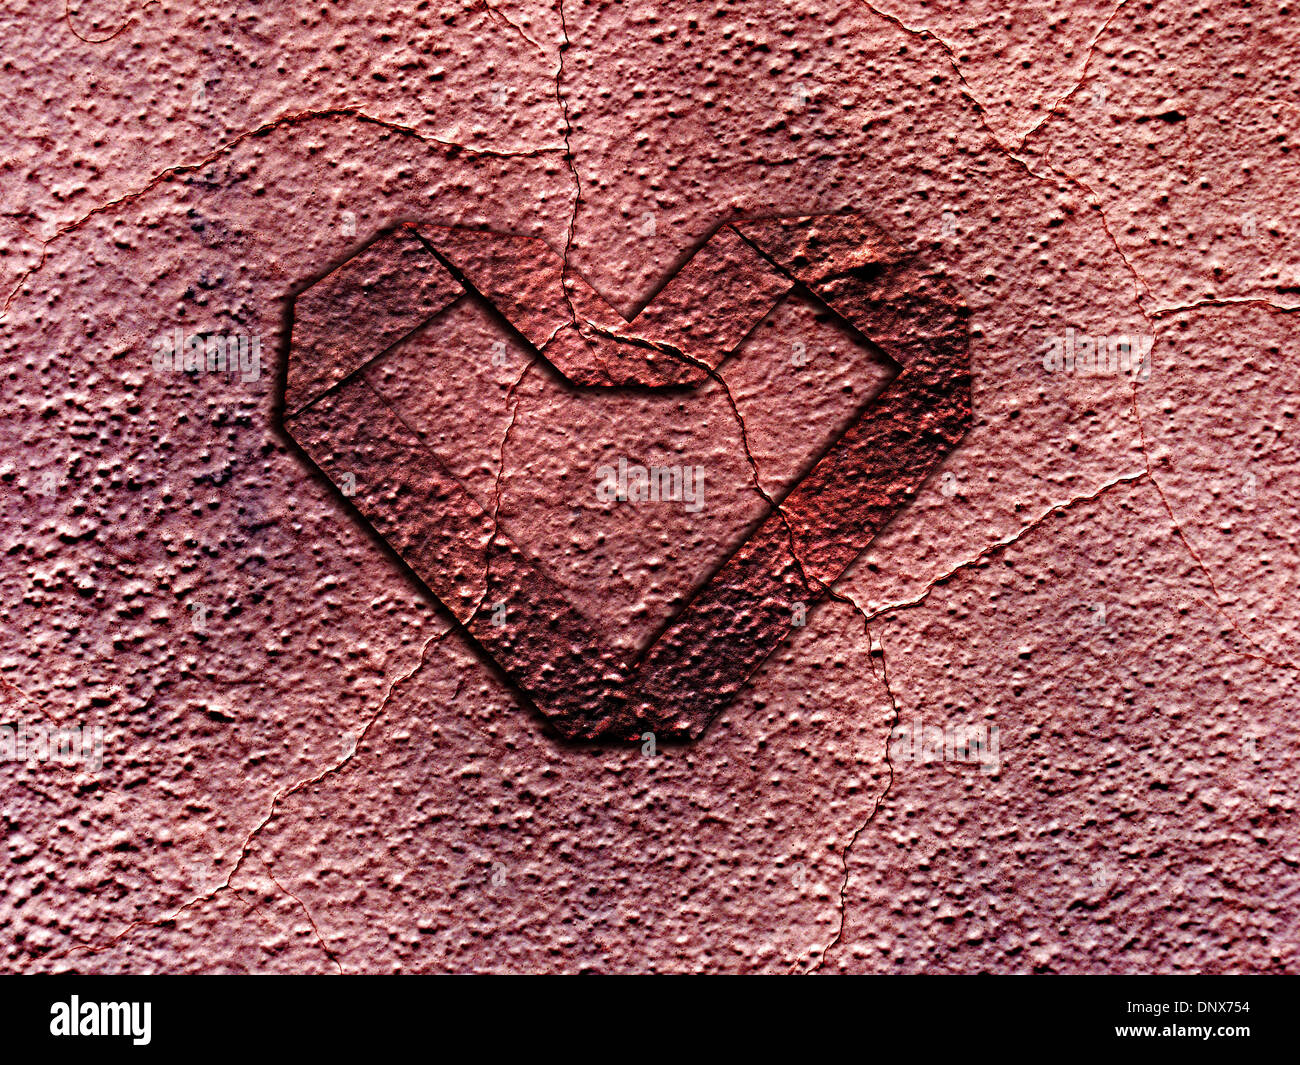 Grunge heart embossed on rusty metal surface - Valentine concept Stock Photo